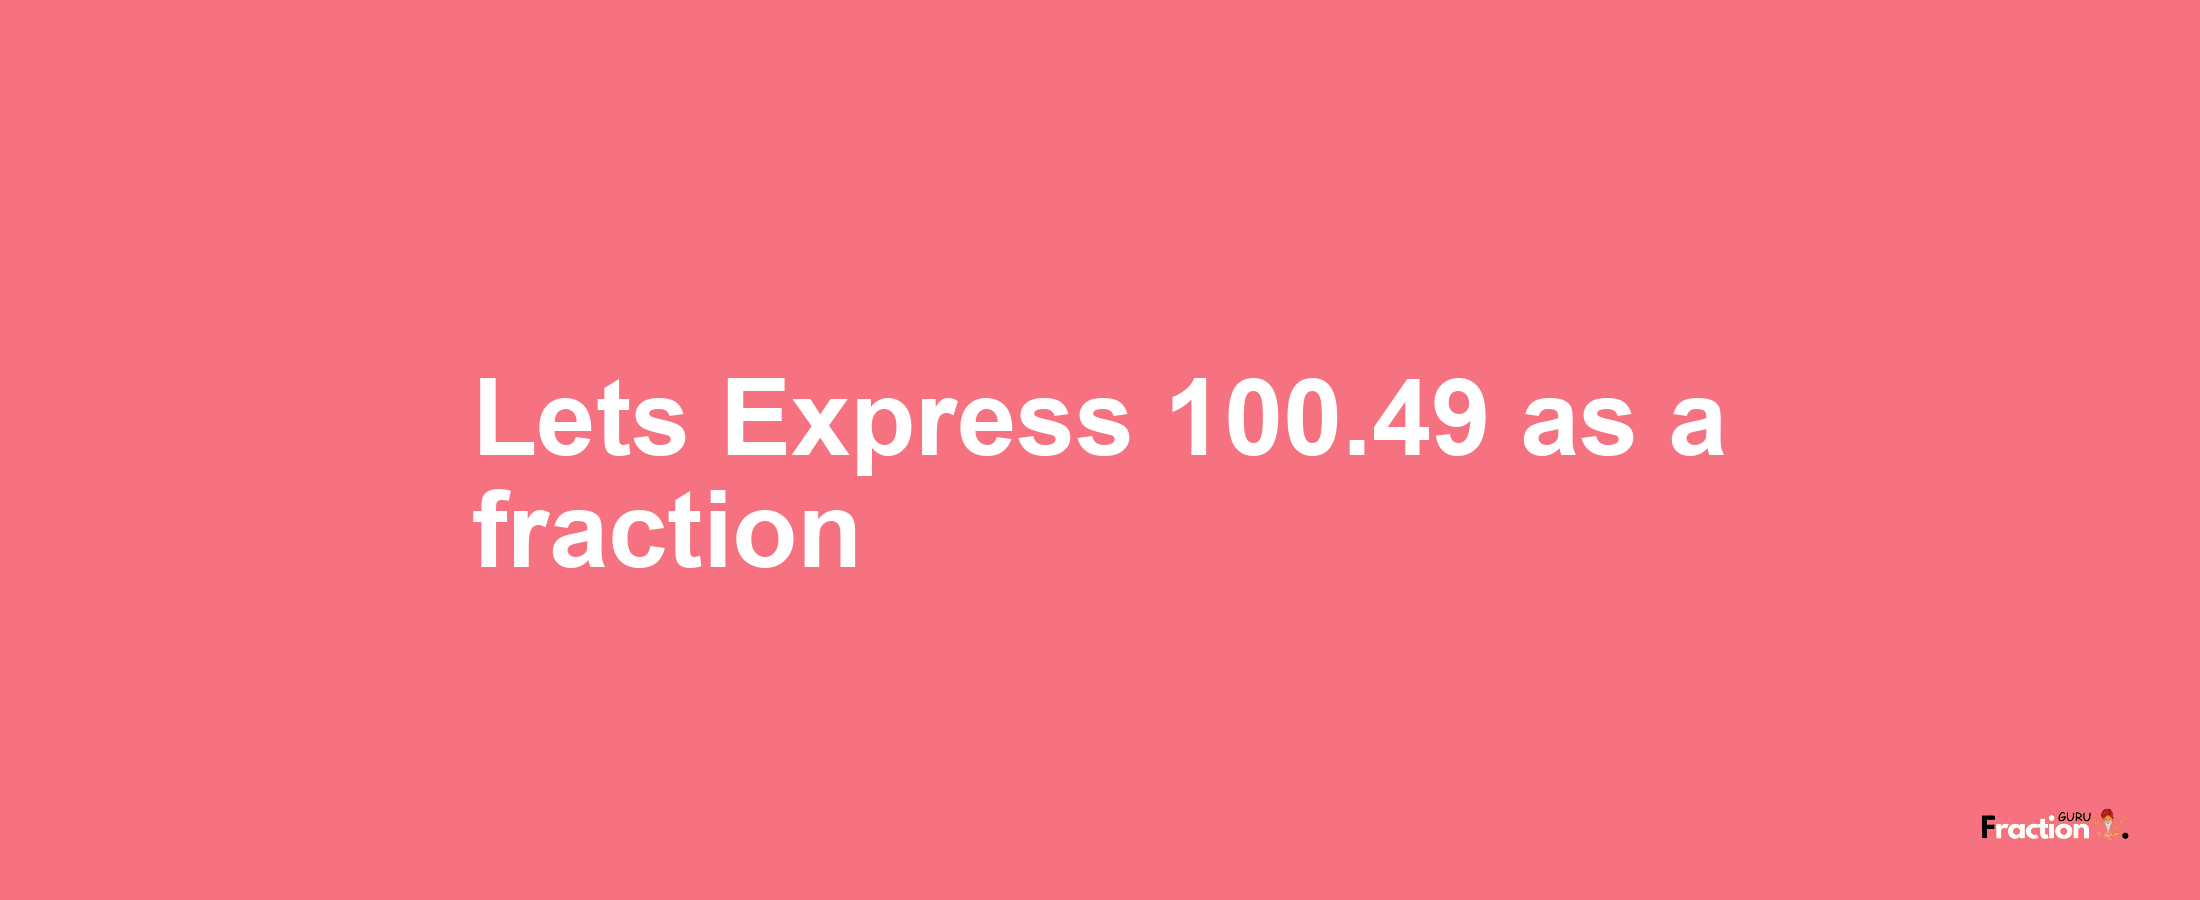 Lets Express 100.49 as afraction